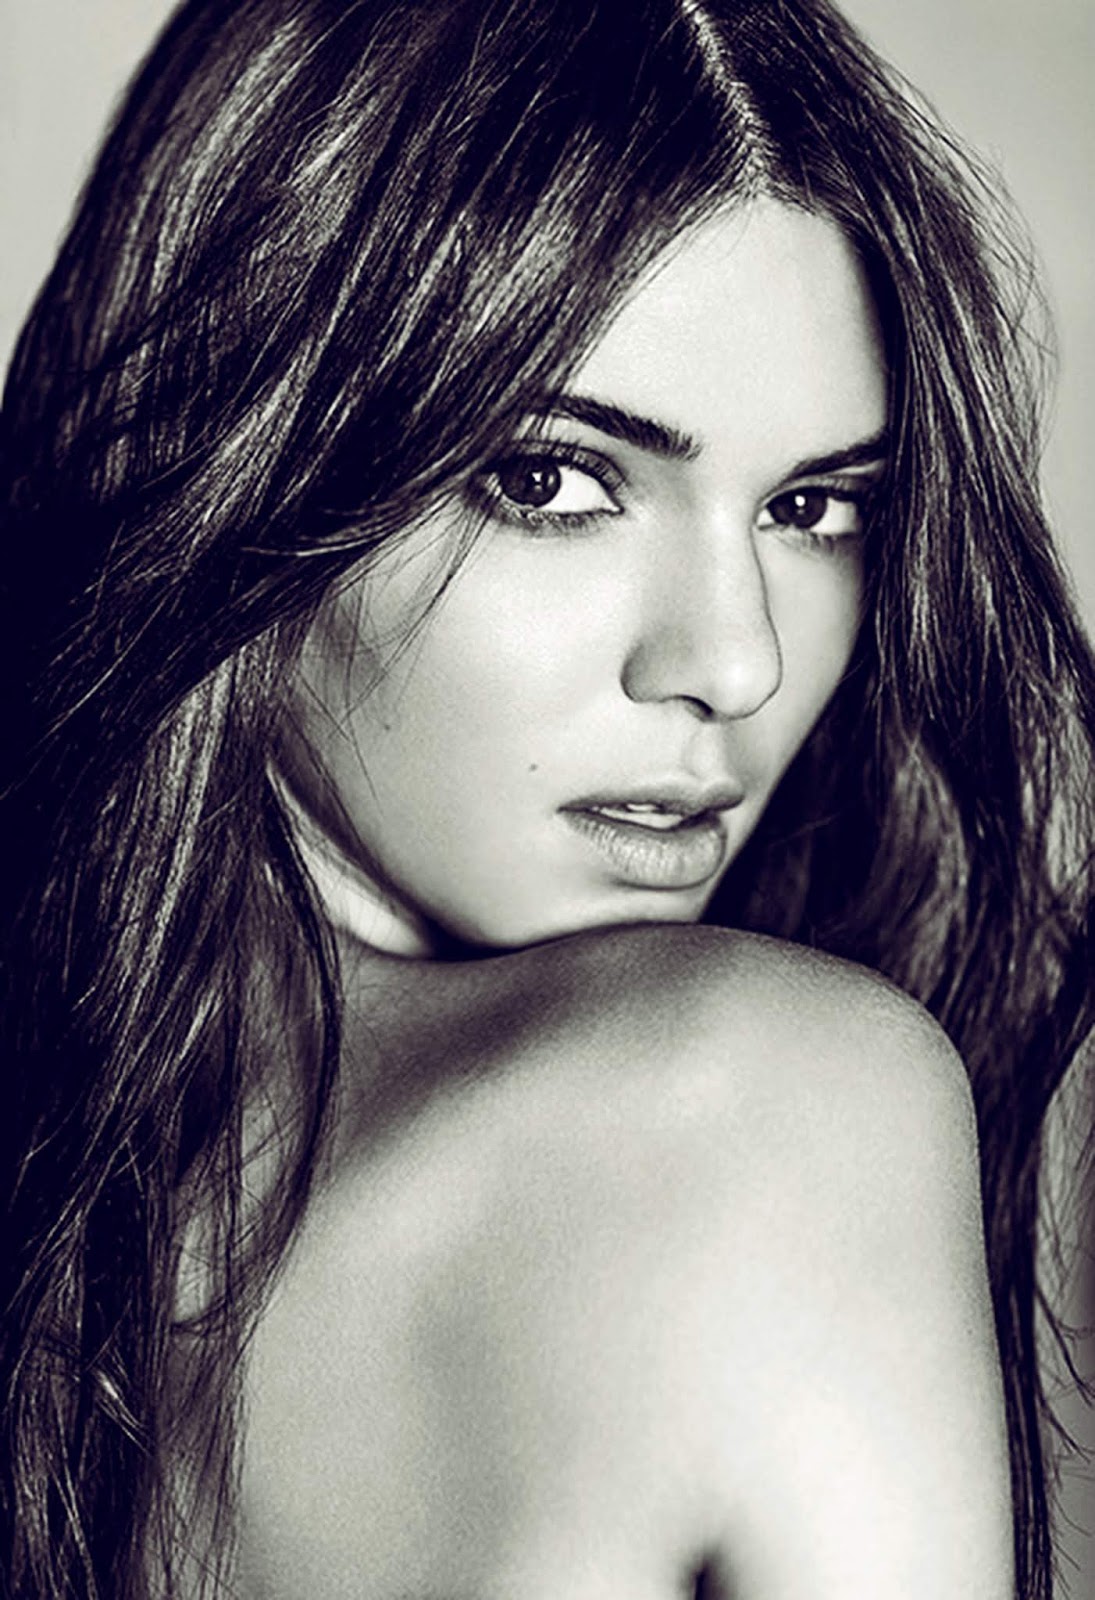 Russell James 2014 | Kendall Jenner Fans Page